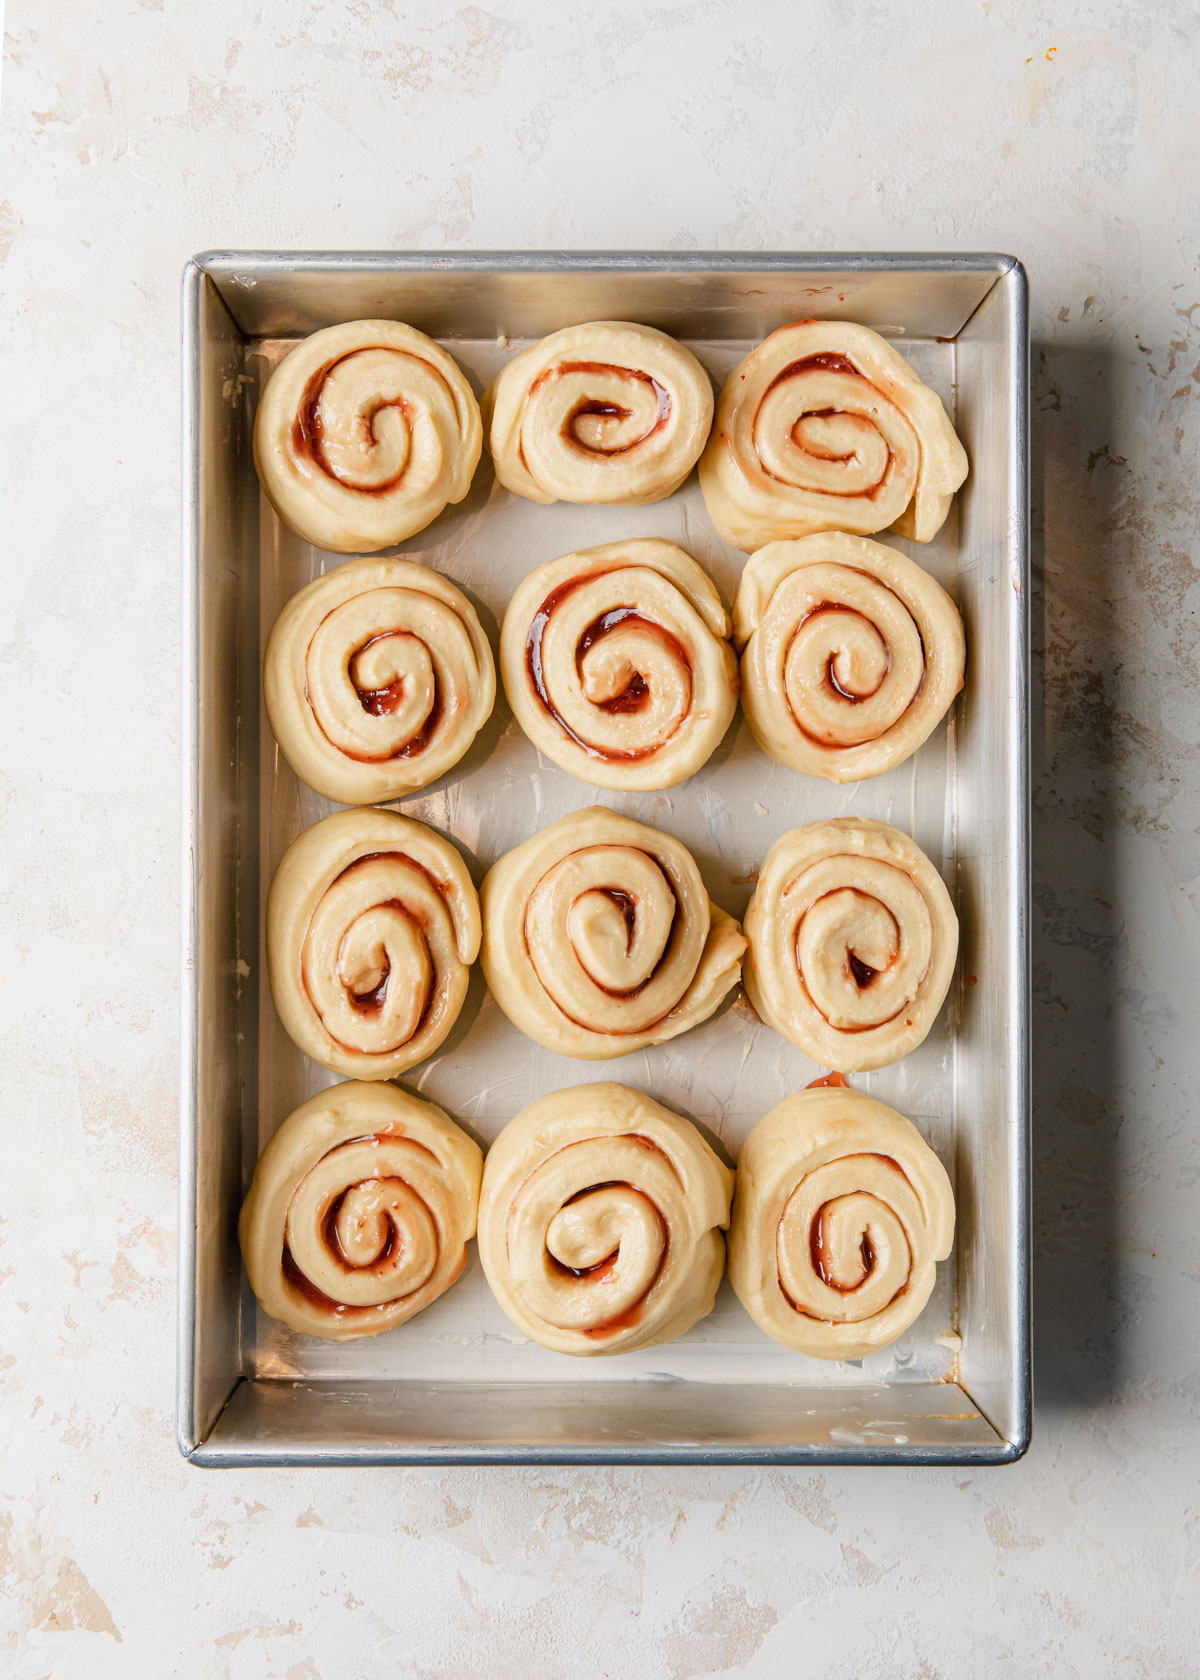 Strawberry jam rolls proofing in a pan before baking